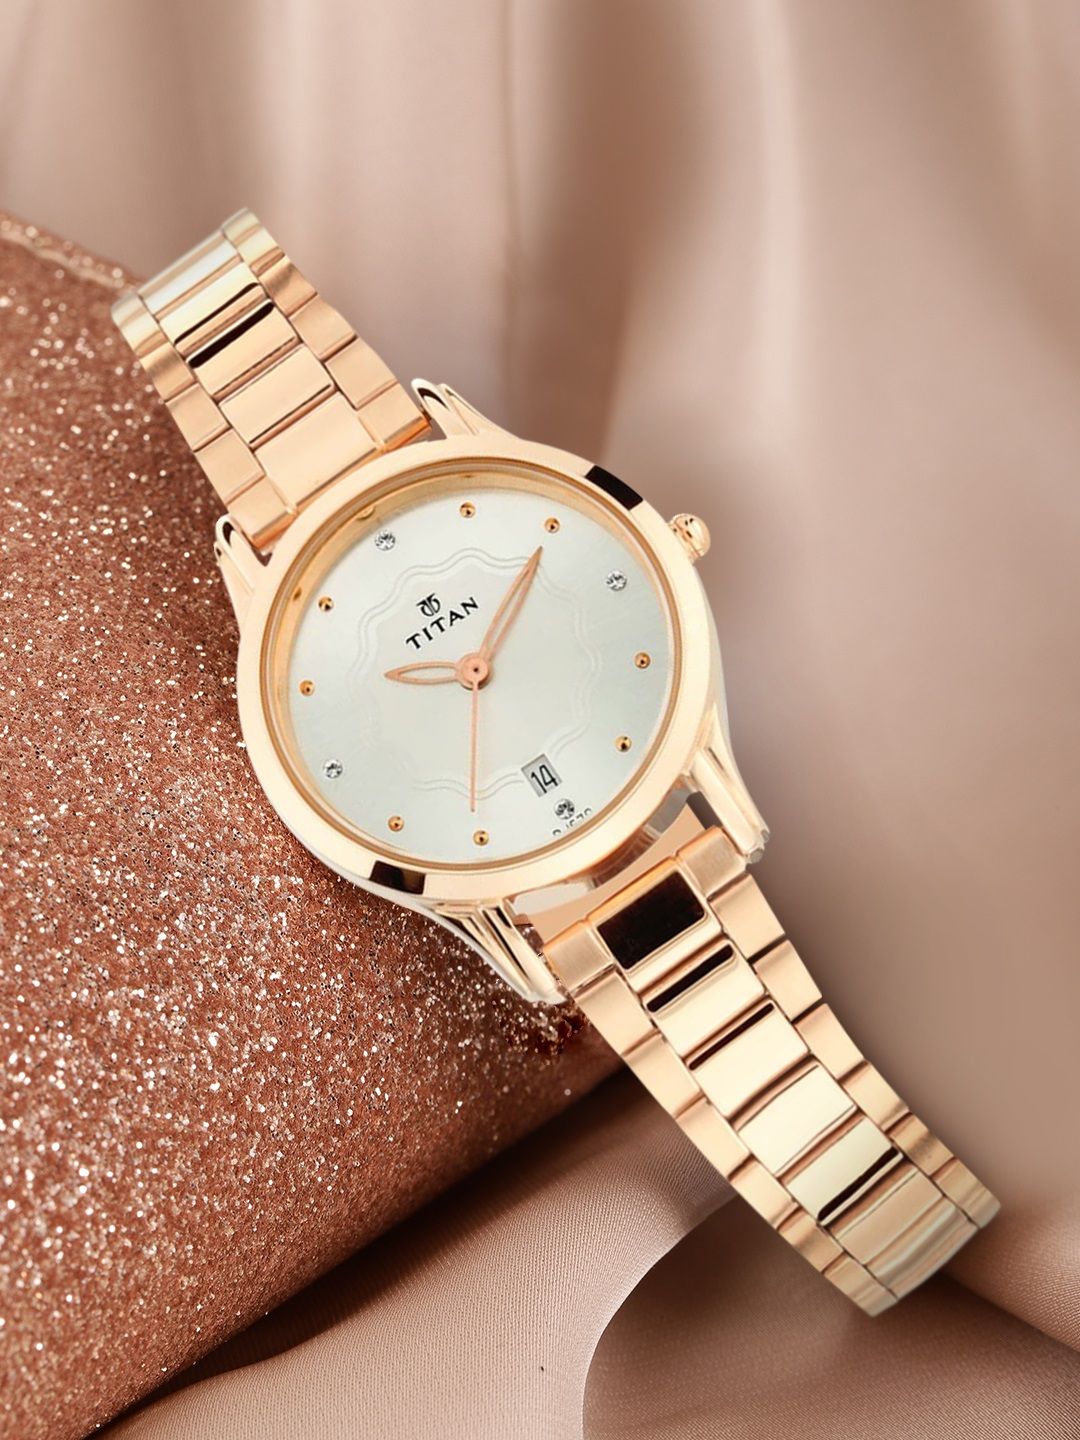 Titan Women Cream-Coloured & Gold-Toned Analogue Watch Price in India